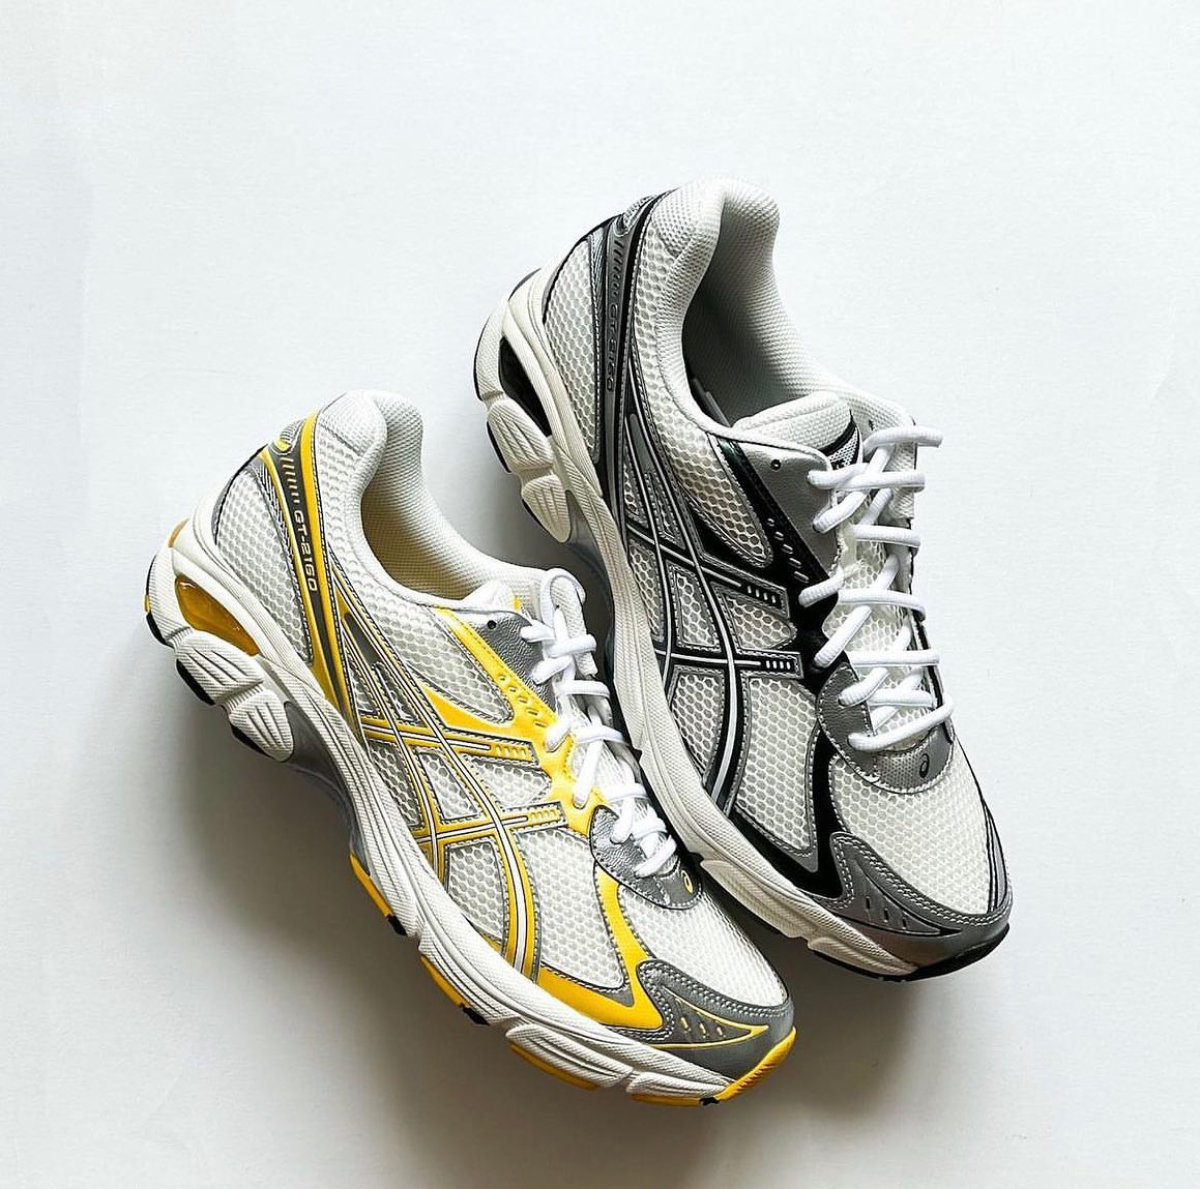 KITH-Exclusive ASICS GT-2160 Sneakers Hit the Internet